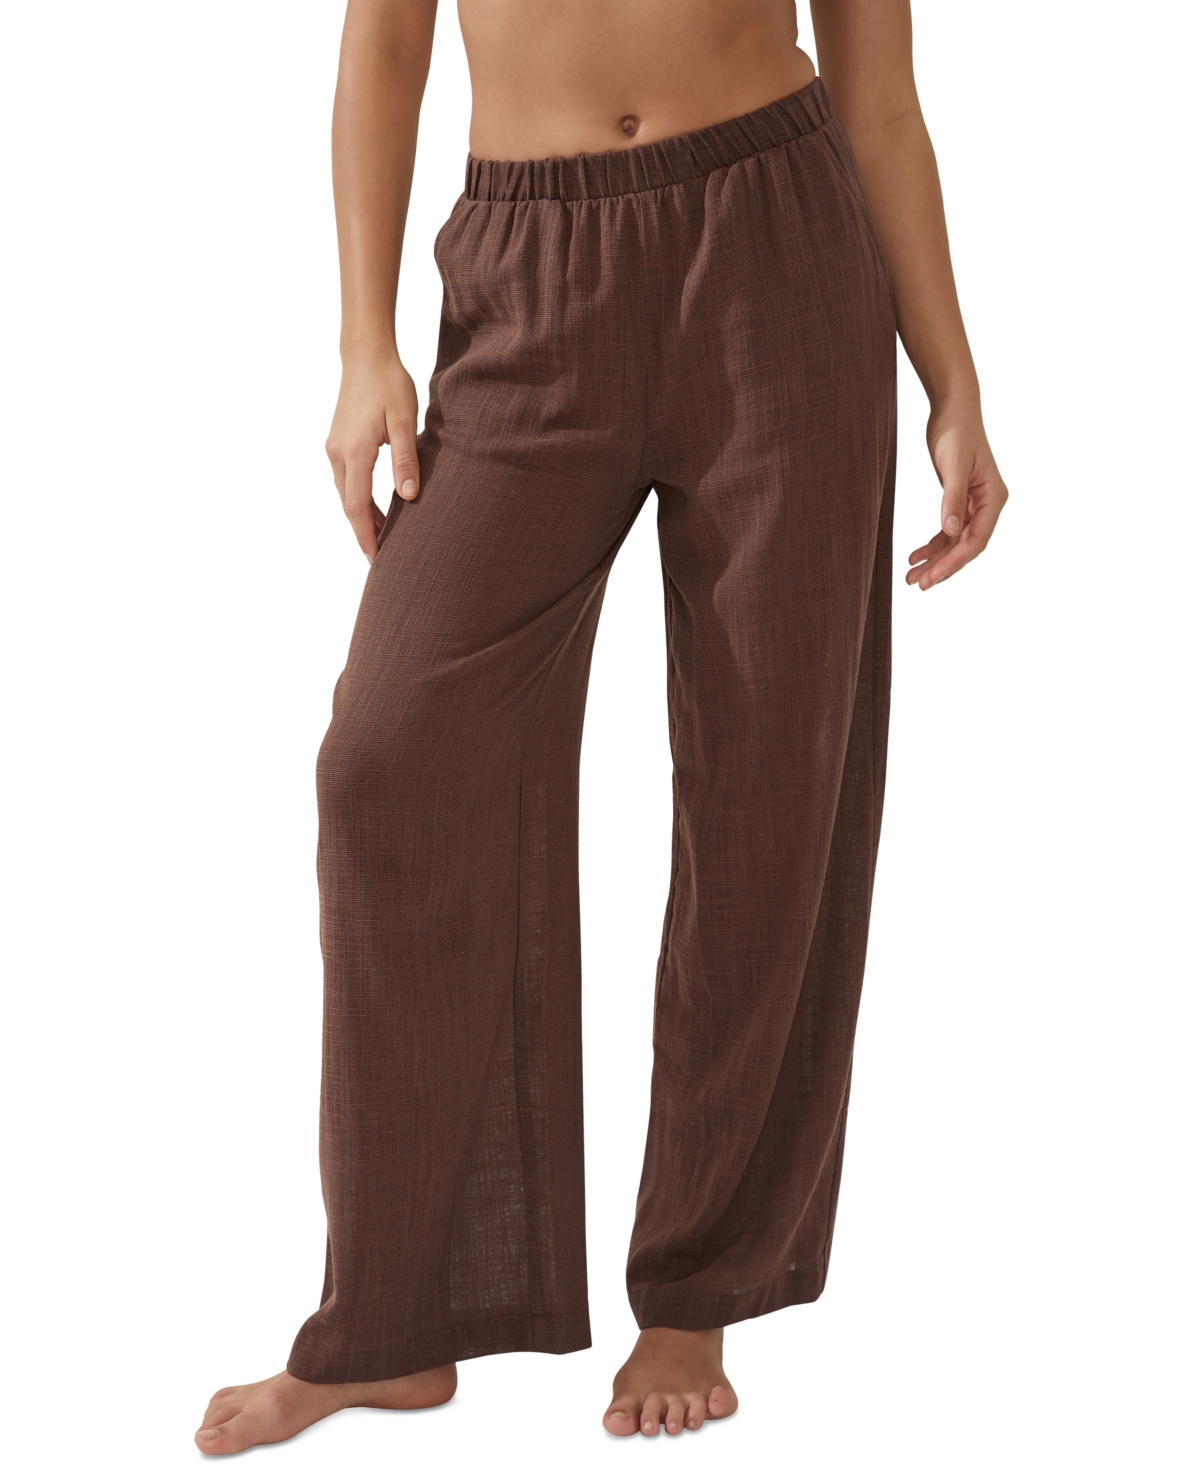 COTTON ON WOMEN'S RELAXED WIDE-LEG PULL-ON BEACH PANTS